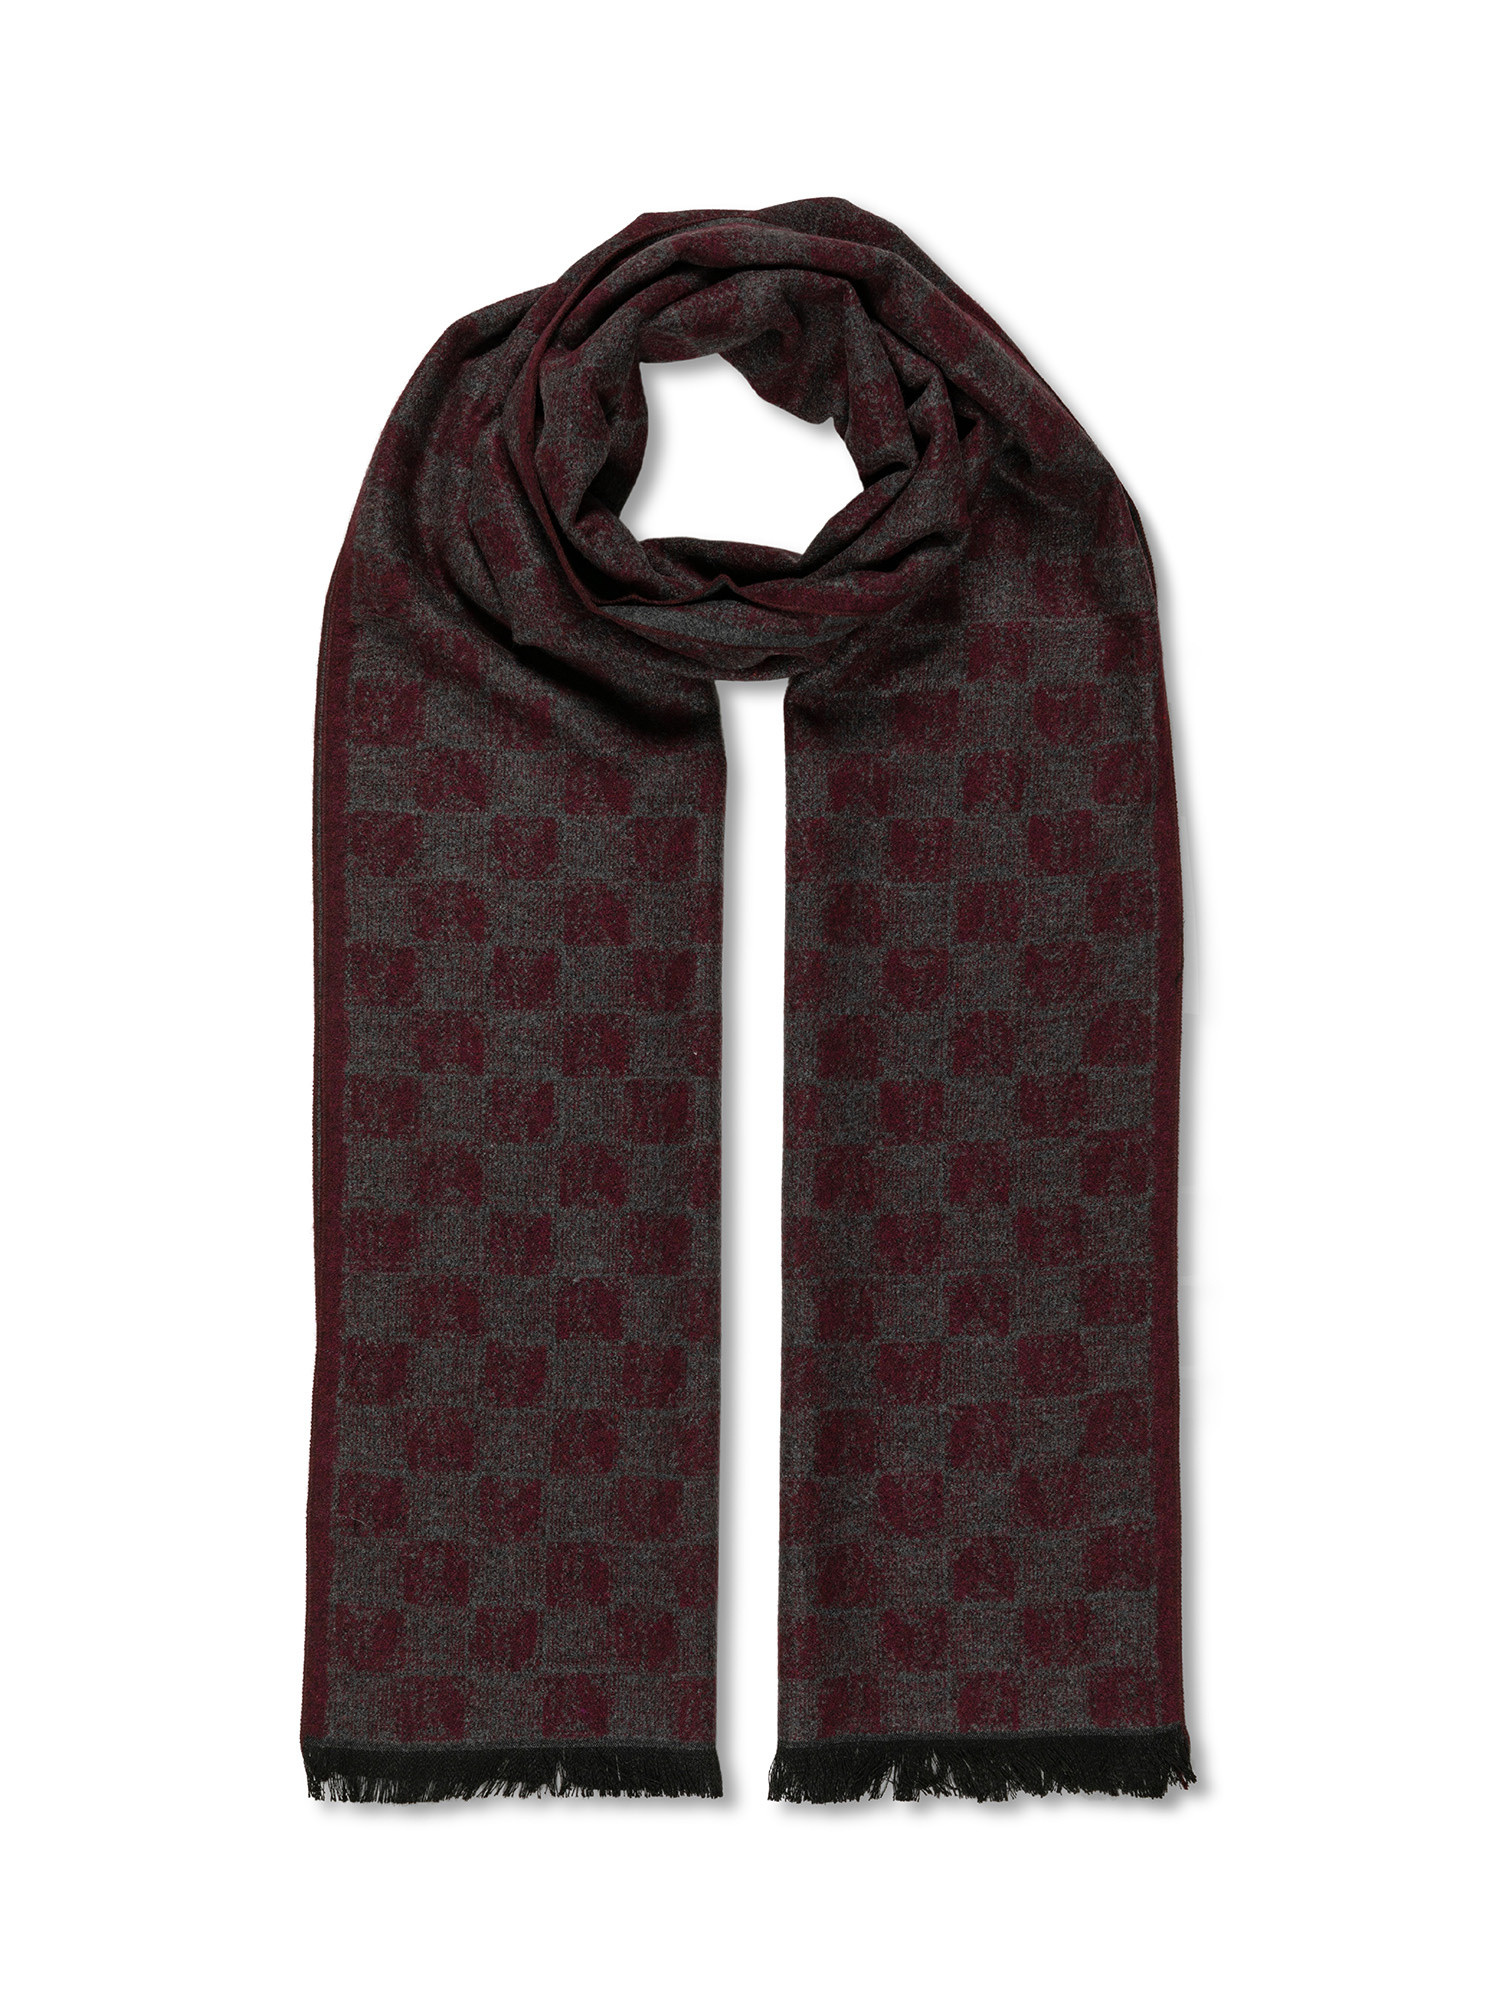 Luca D'Altieri - Checkerboard scarf, Dark Red, large image number 0